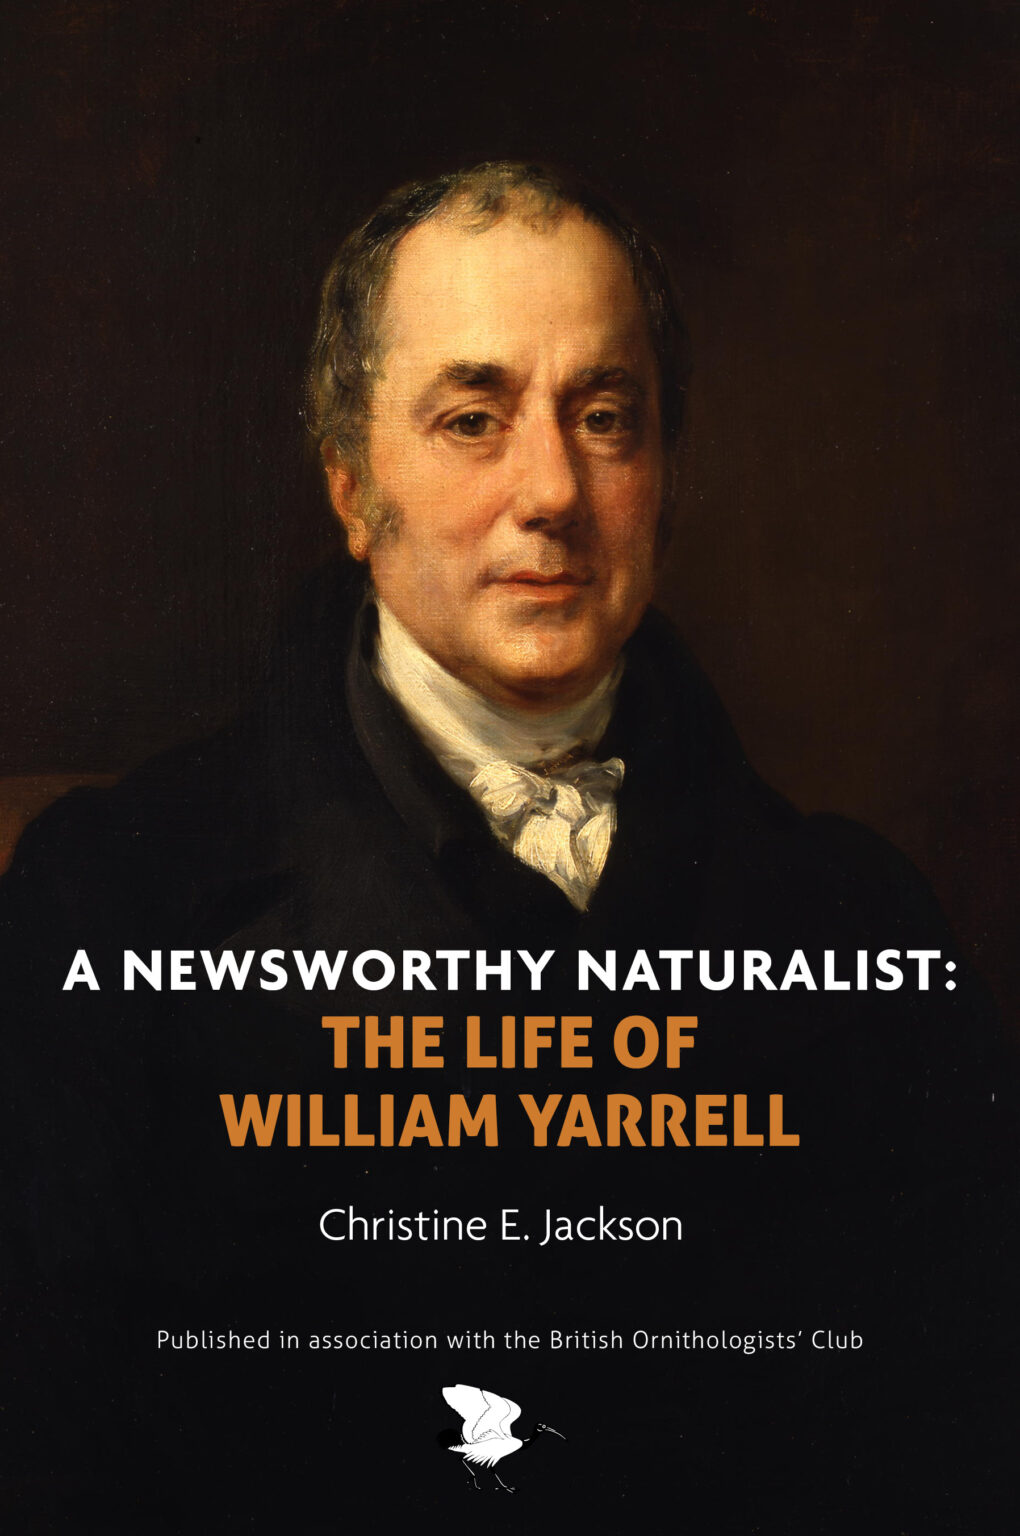 Book cover of A Newsworthy Naturalist The Life of William Yarrell, showing a portrait of William Yarrell